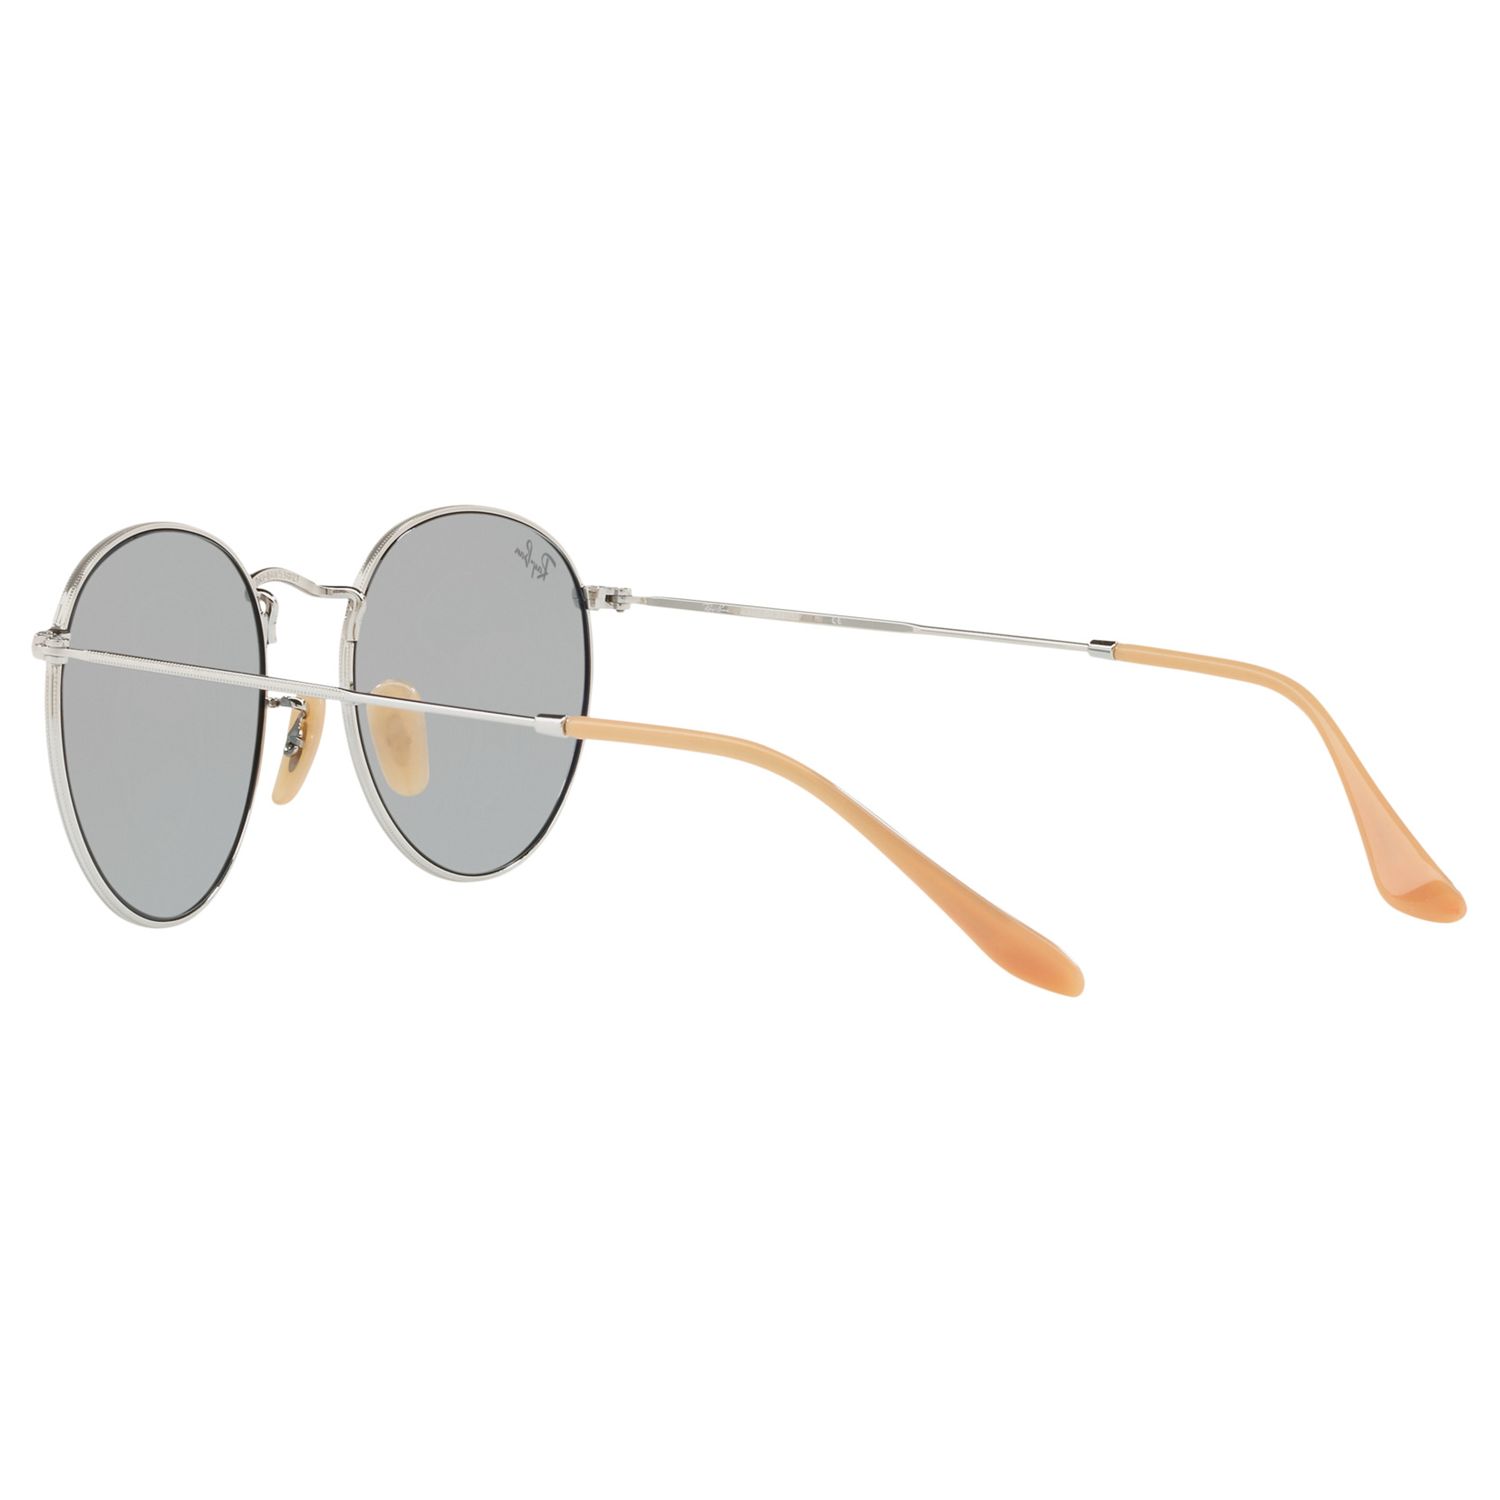 Buy Ray-Ban RB3447 Round Flash Sunglasses Online at johnlewis.com